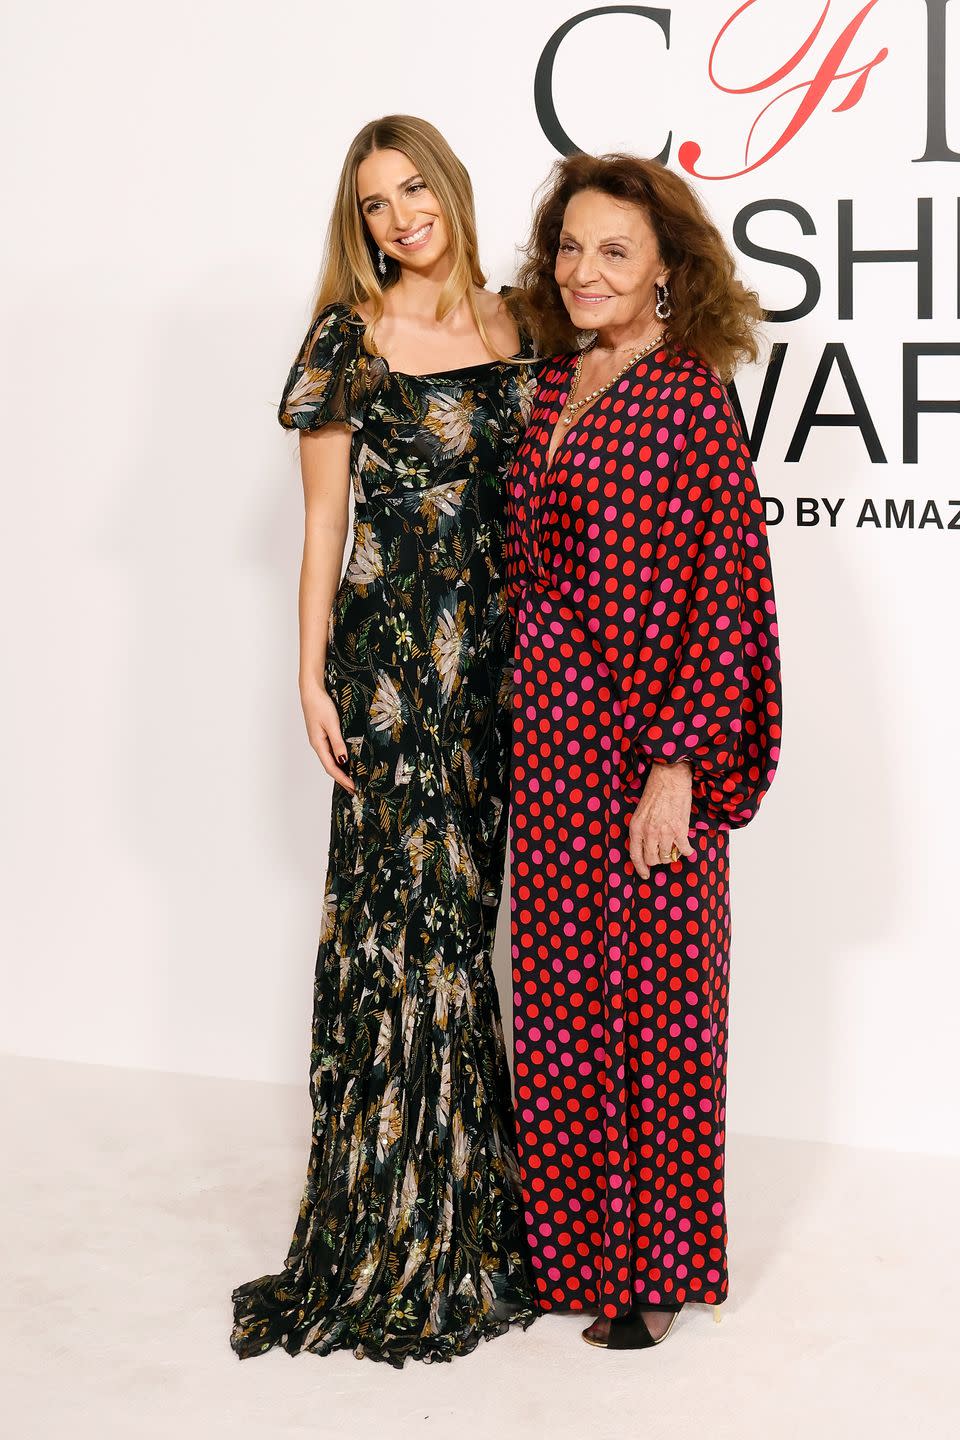 new york, new york november 06 talita von fursteunberg and diane von furstenberg attend the 2023 cfda awards at american museum of natural history on november 06, 2023 in new york city photo by taylor hillfilmmagic